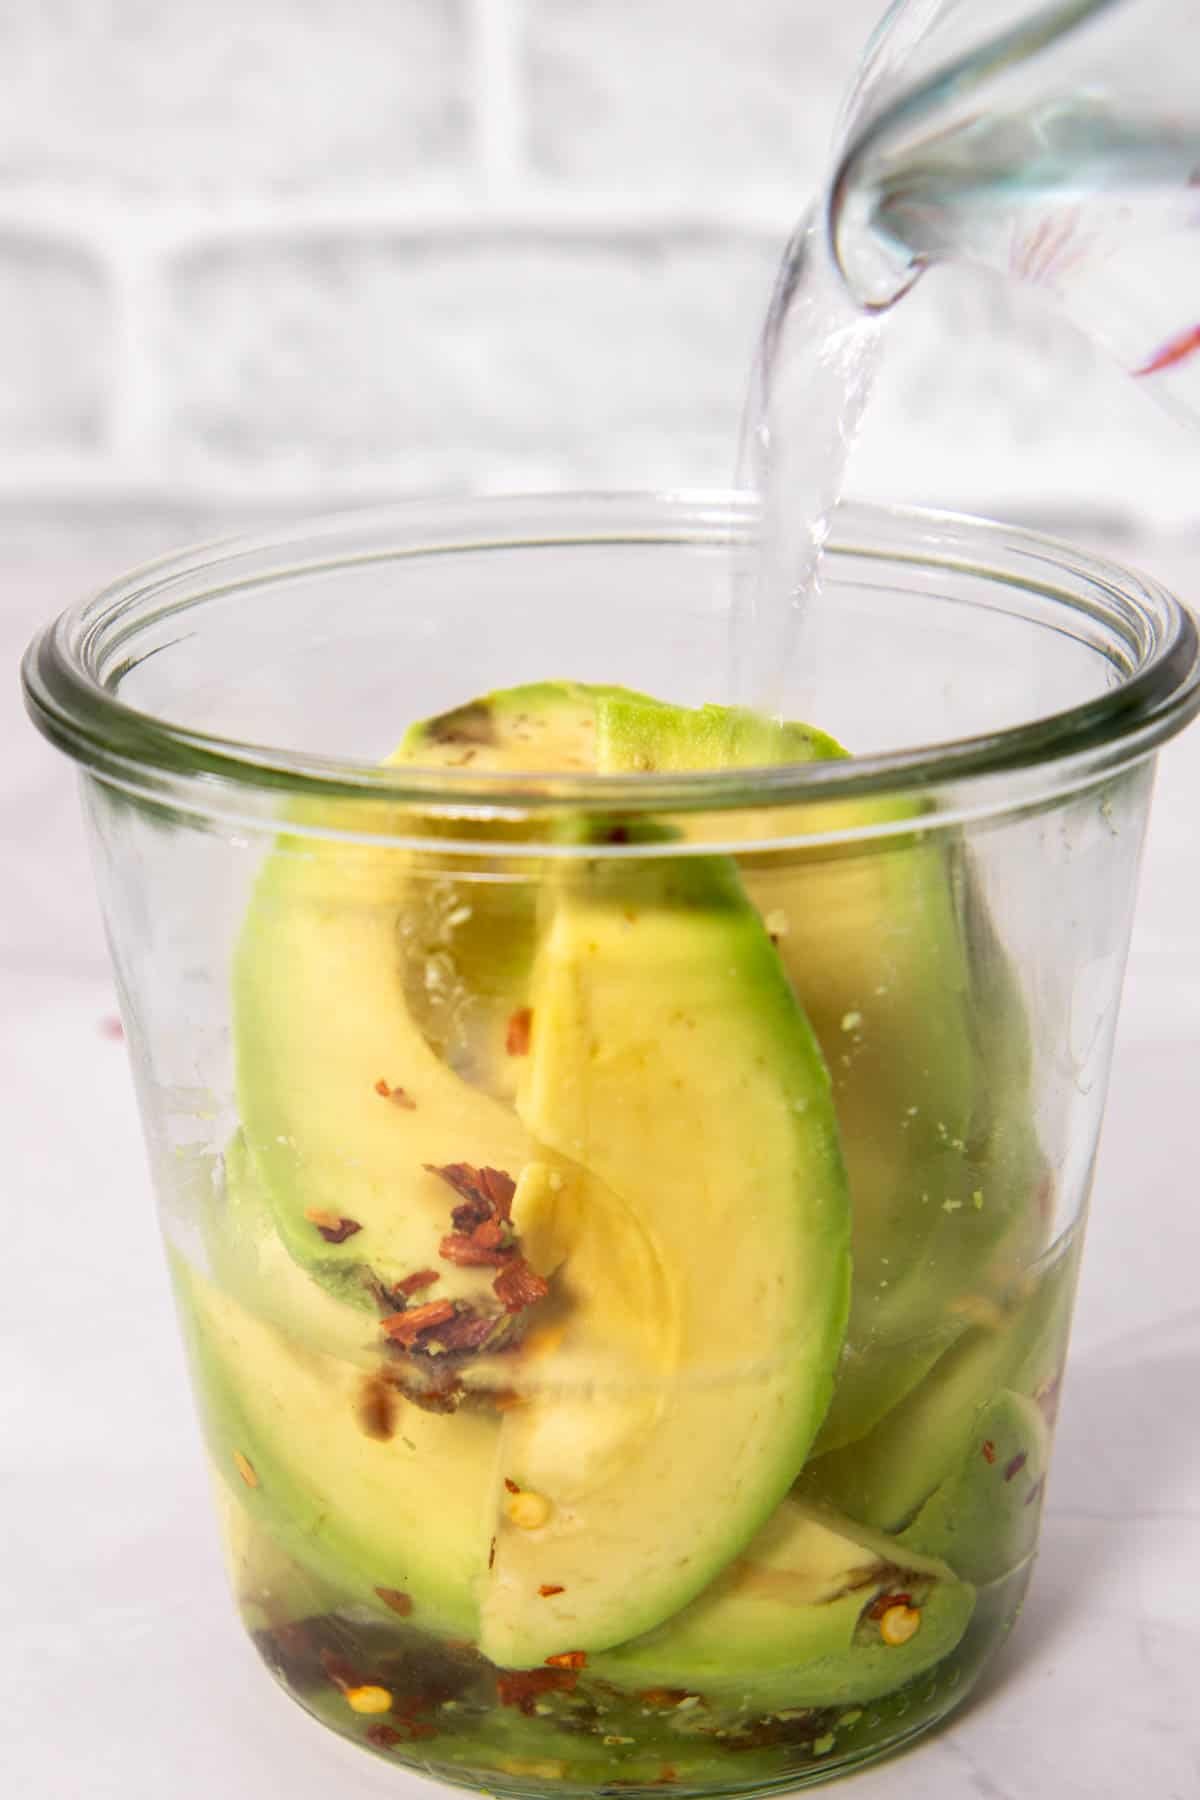 Pouring pickling liquid on avocados